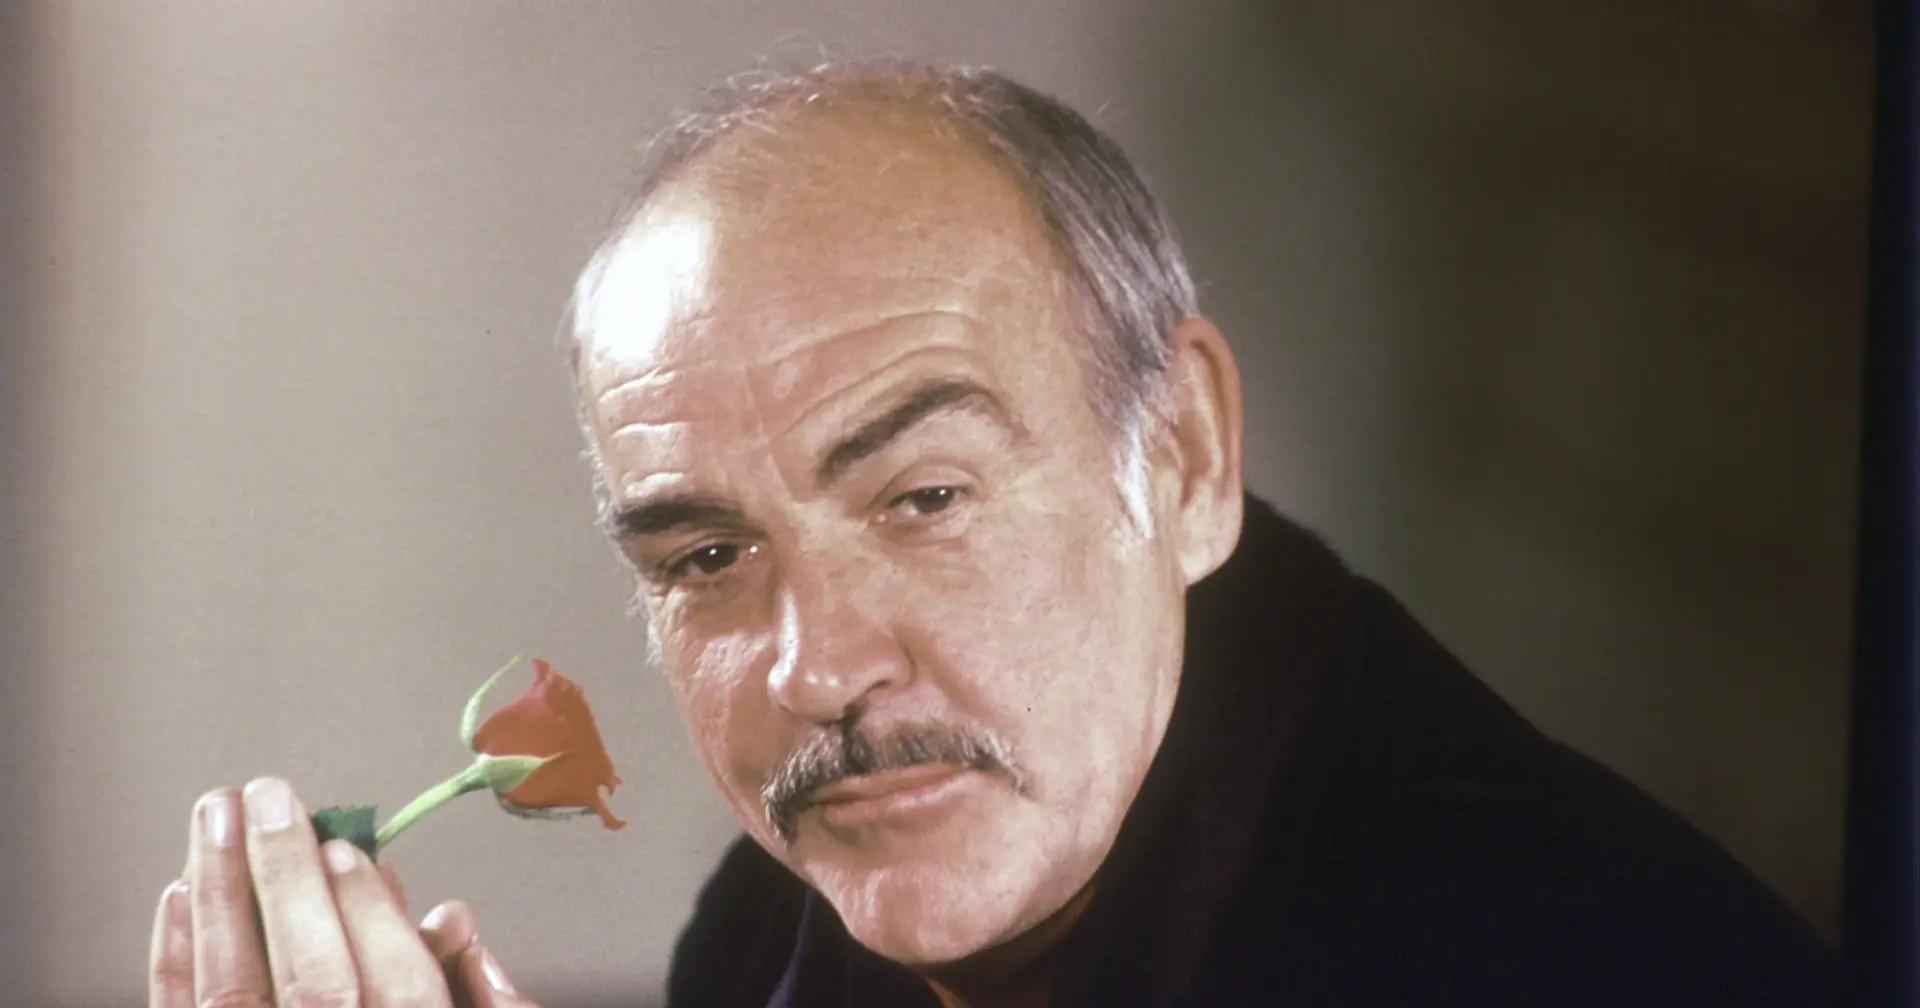 Matt Busby once offered Man United contract to Sean Connery — but the actor turned it down